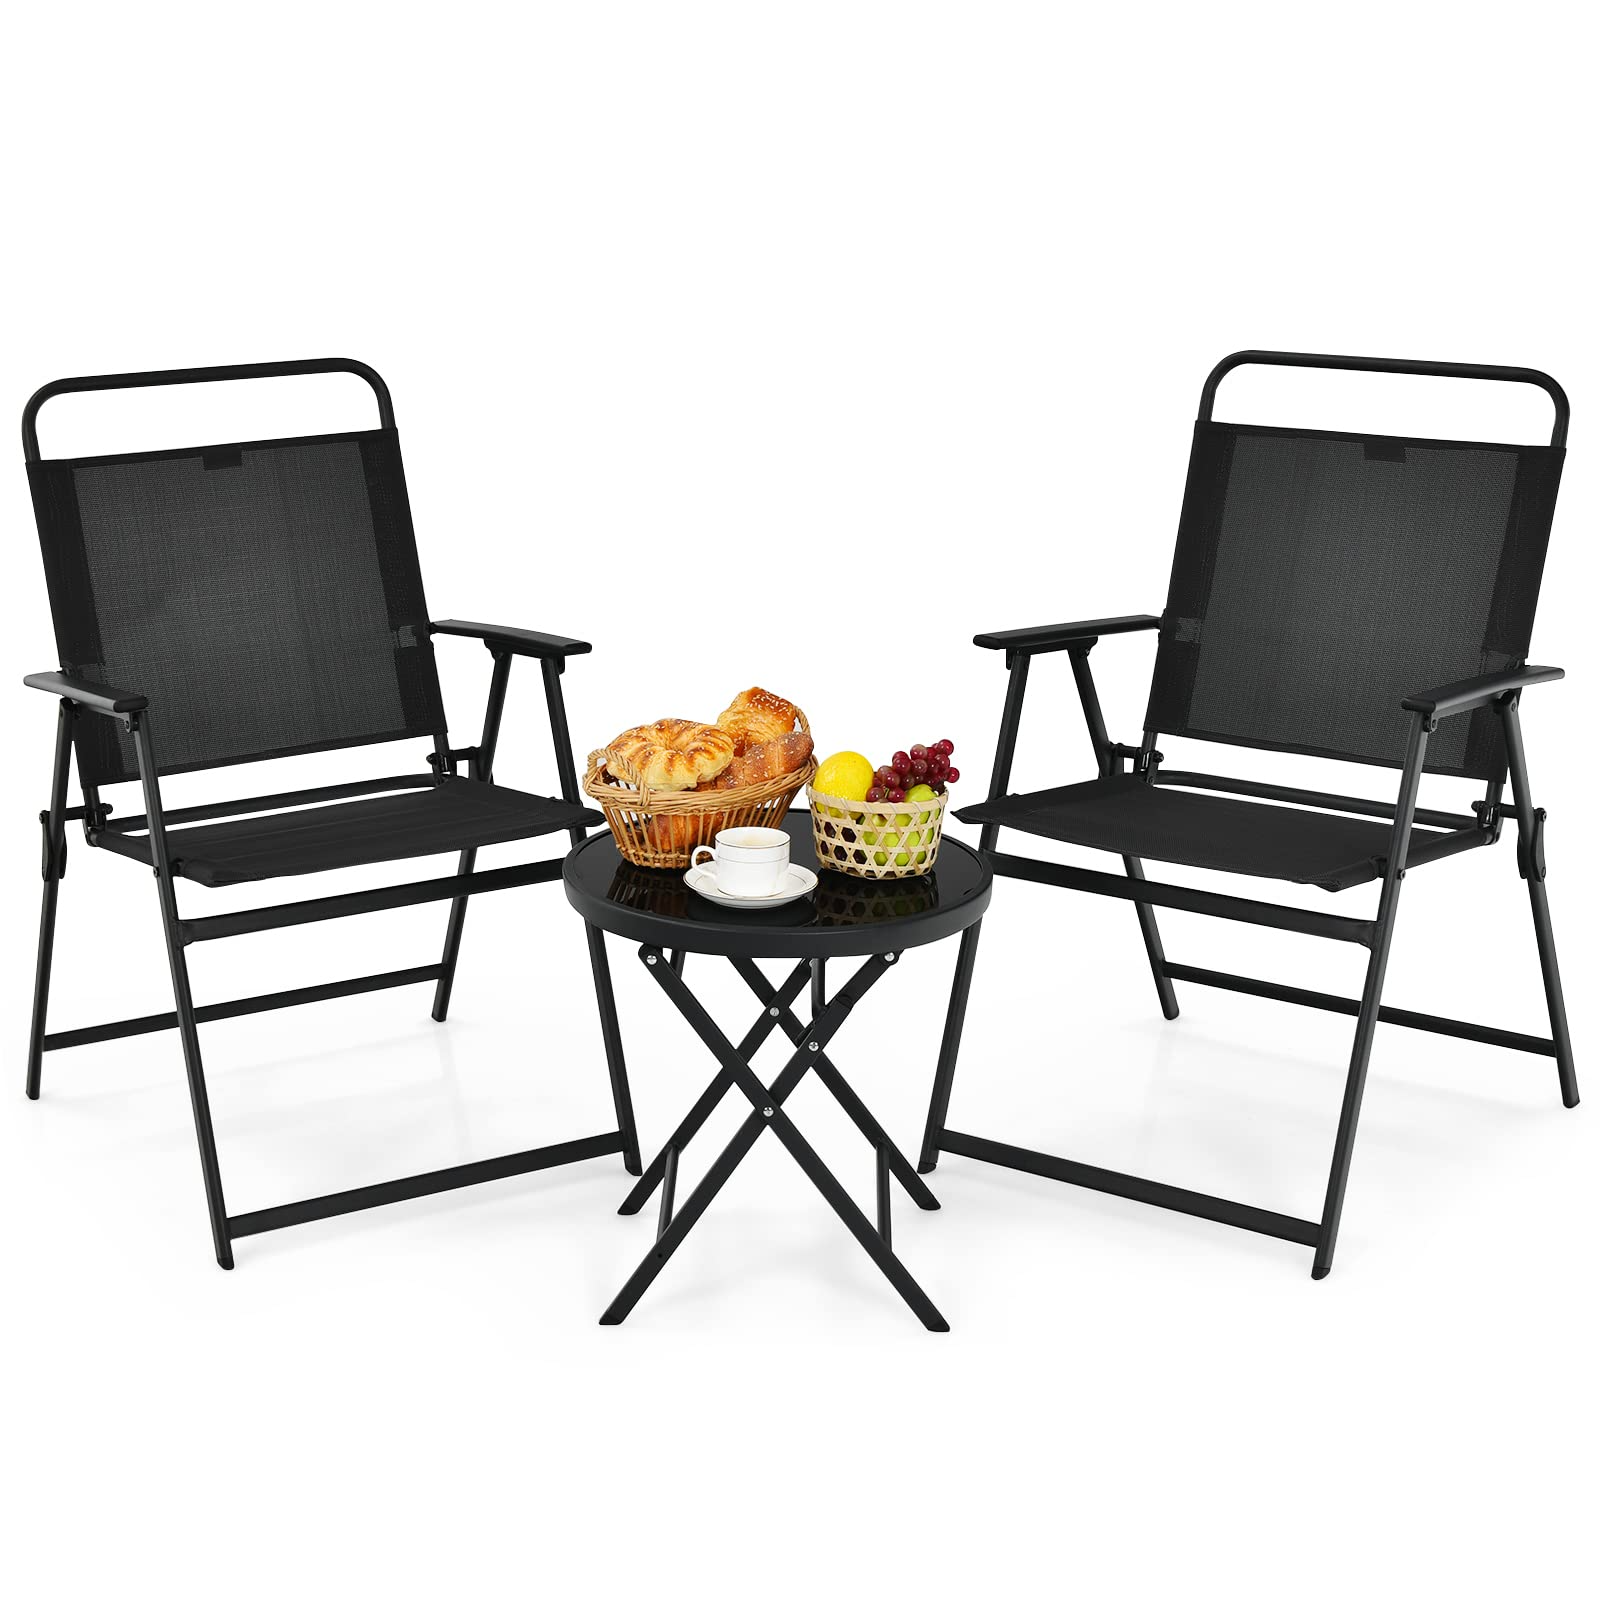 Giantex 3-Piece Patio Table Set, Folding Bistro Set with Tempered Glass Round Table and 2 Lawn Chairs